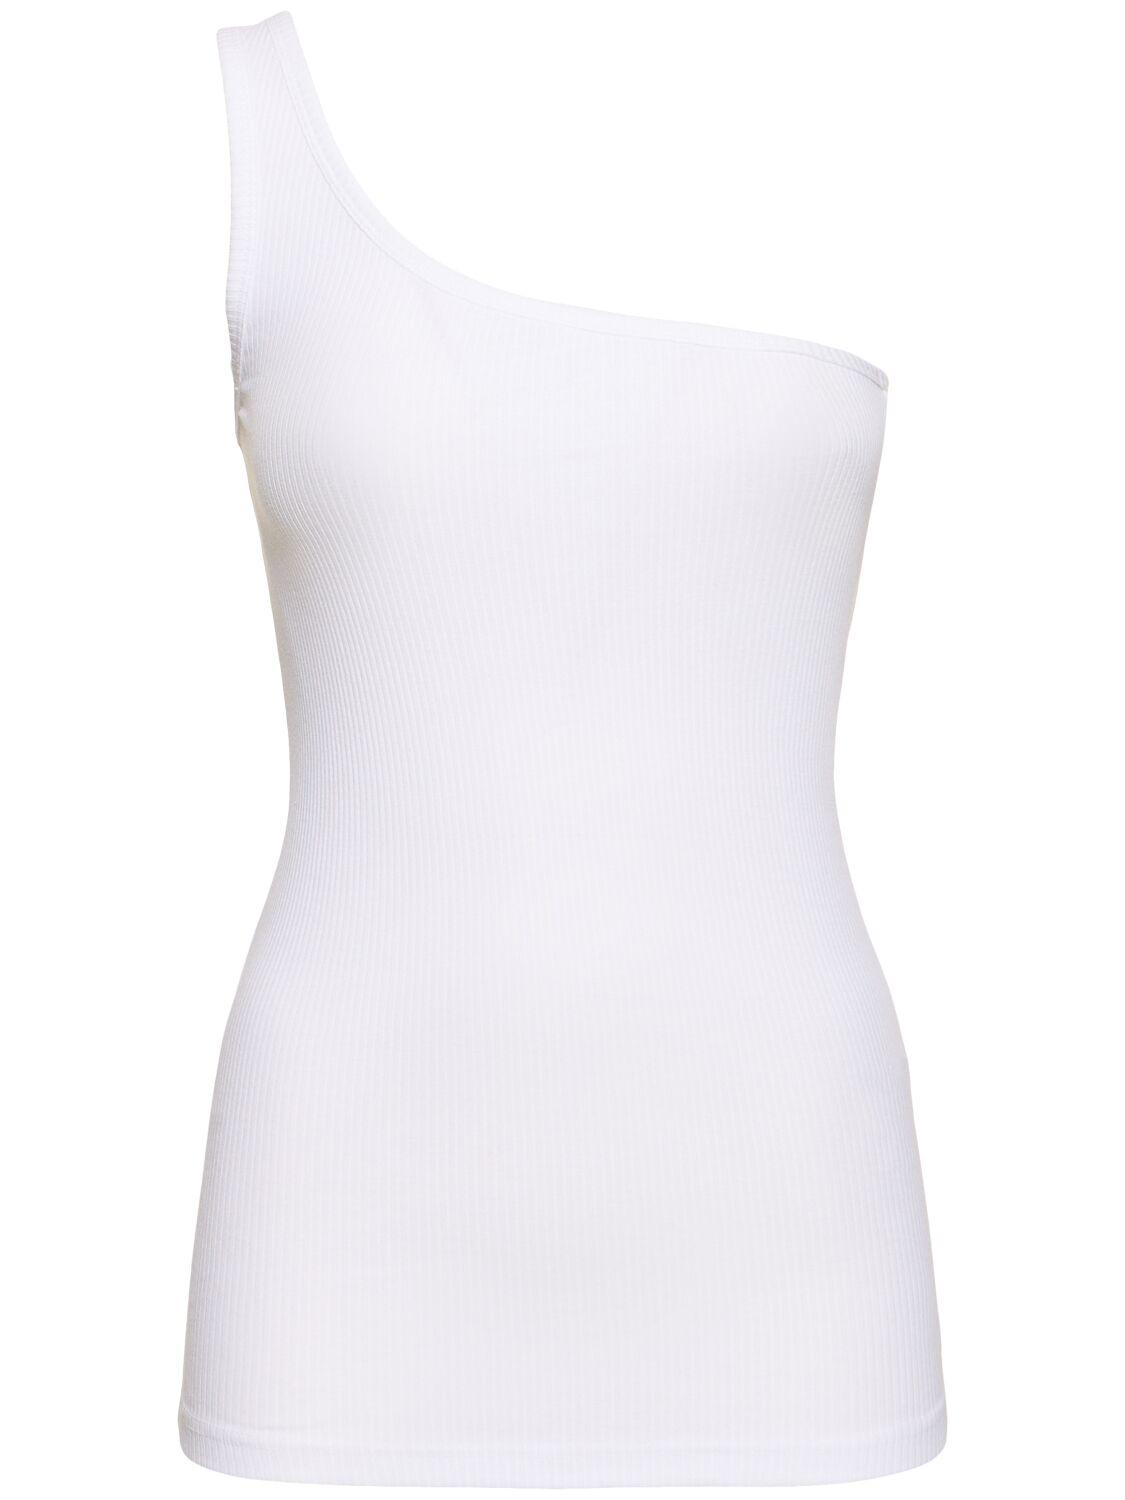 Image of Tresia One Shoulder Cotton Top